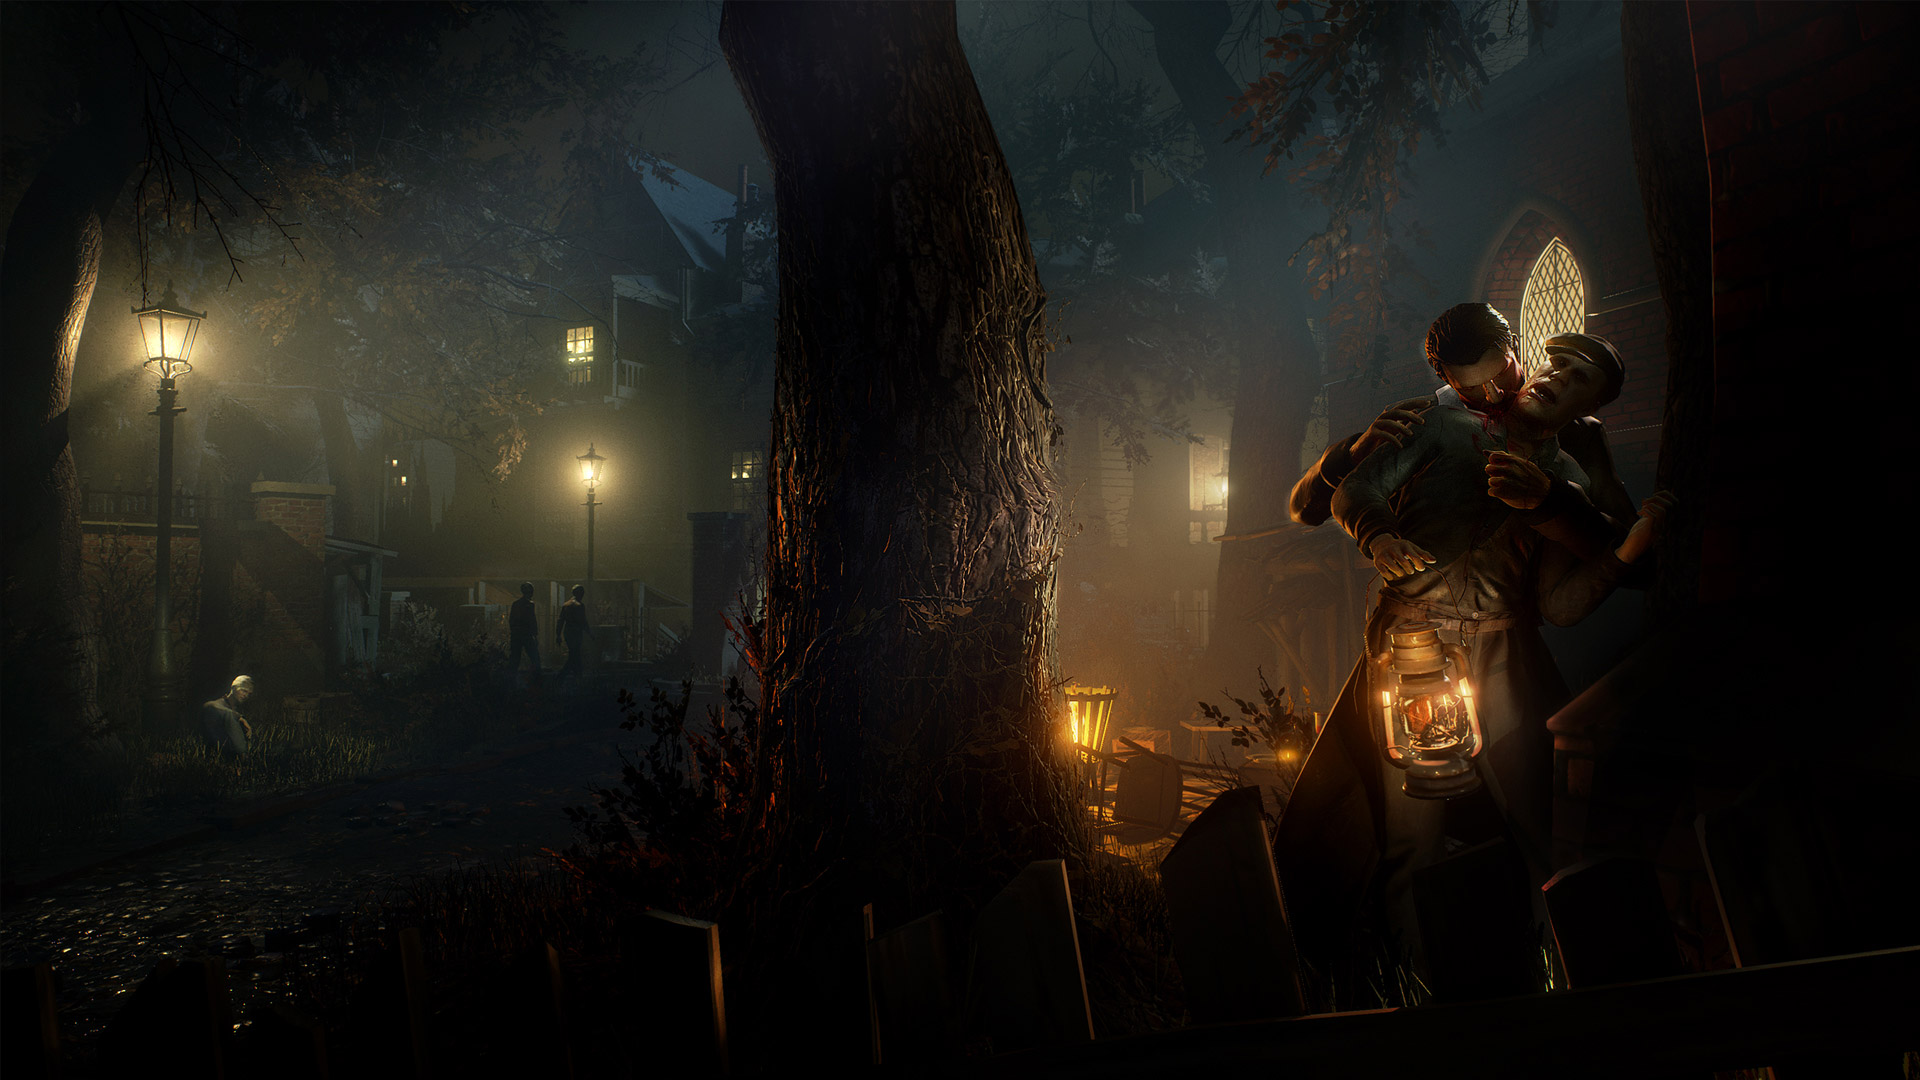 Vampyr 'The Darkness Within' Trailer Revealed